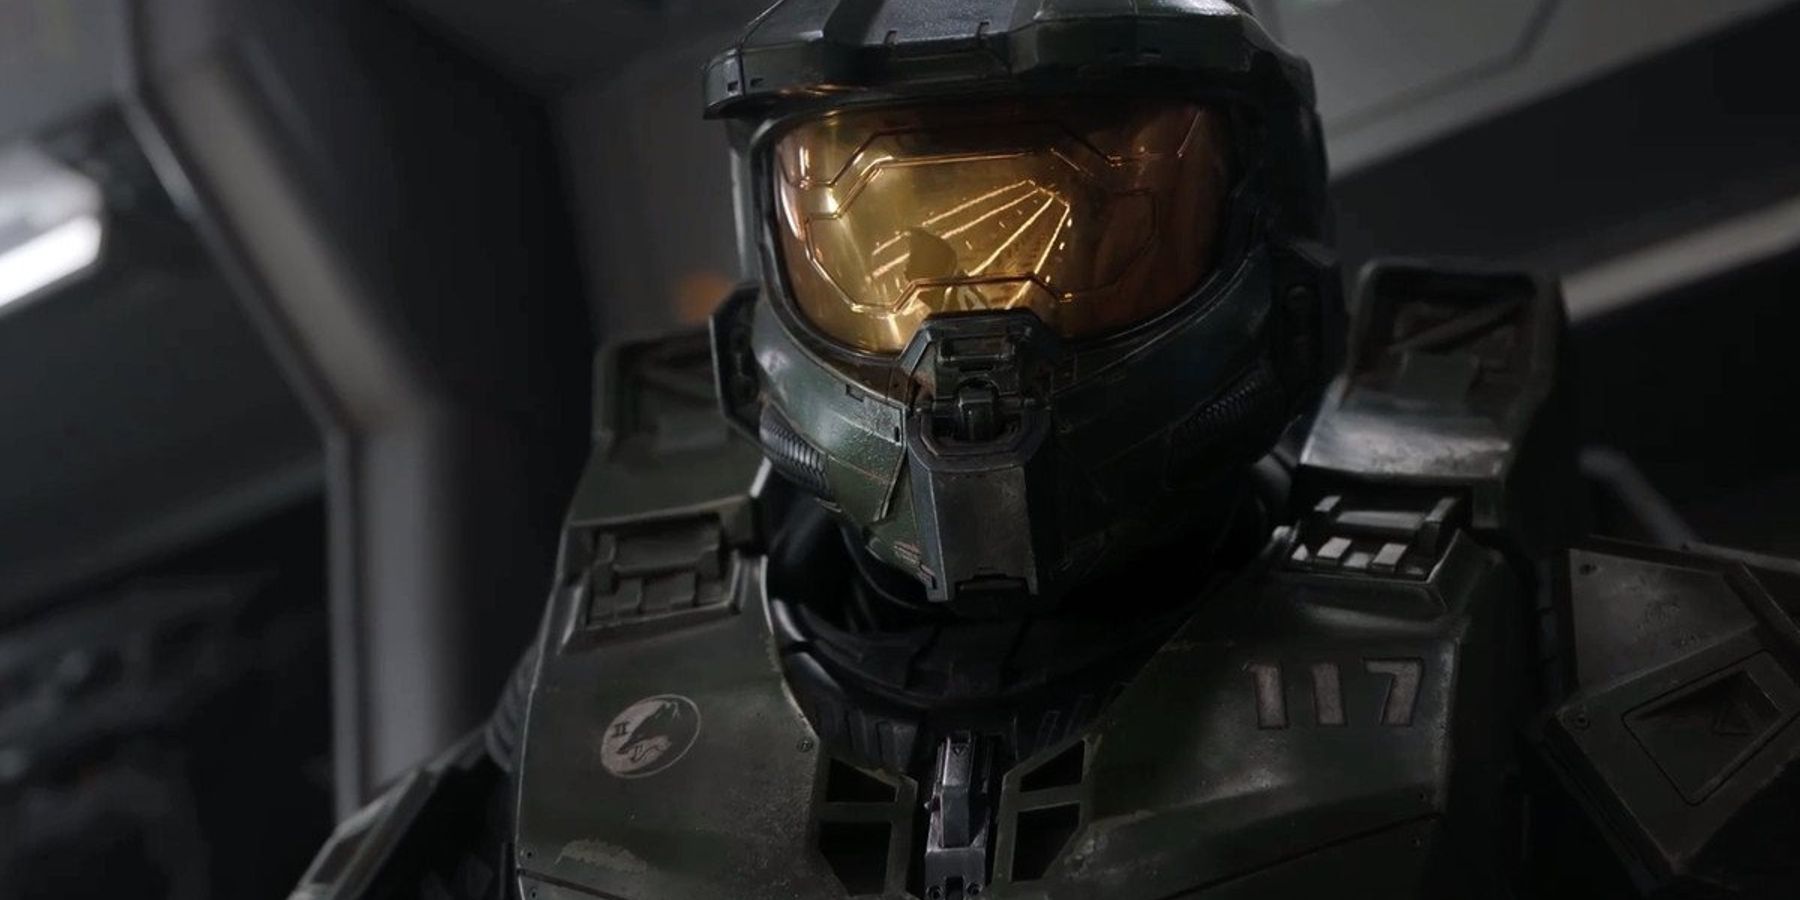 Halo: The Series (2022) Official Trailer!